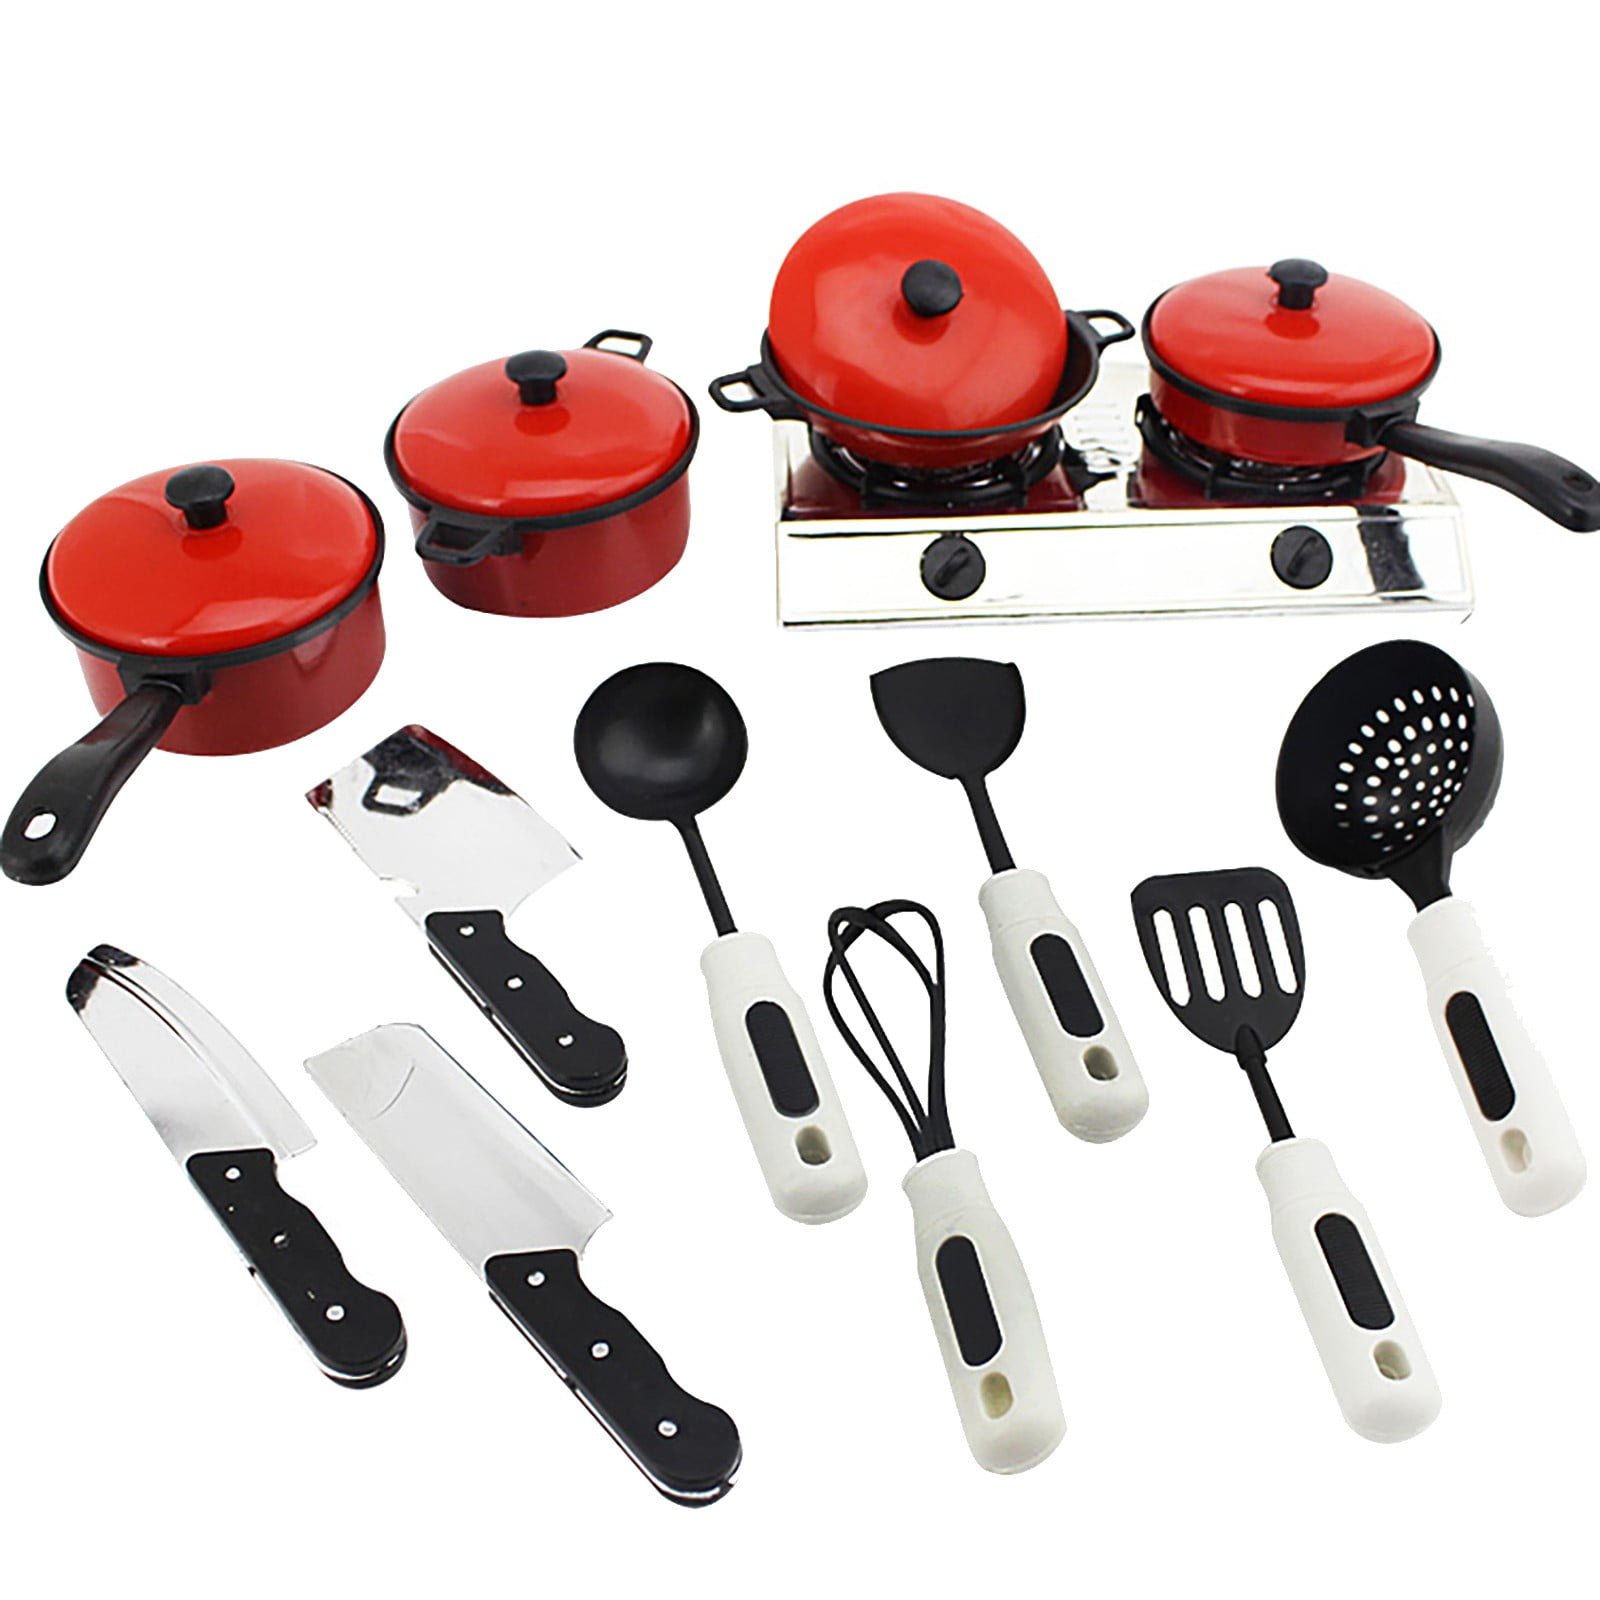 28pcs New Kids Cutlery Role Play Toy Set Kitchen Utensil Accessories Pots Pans 